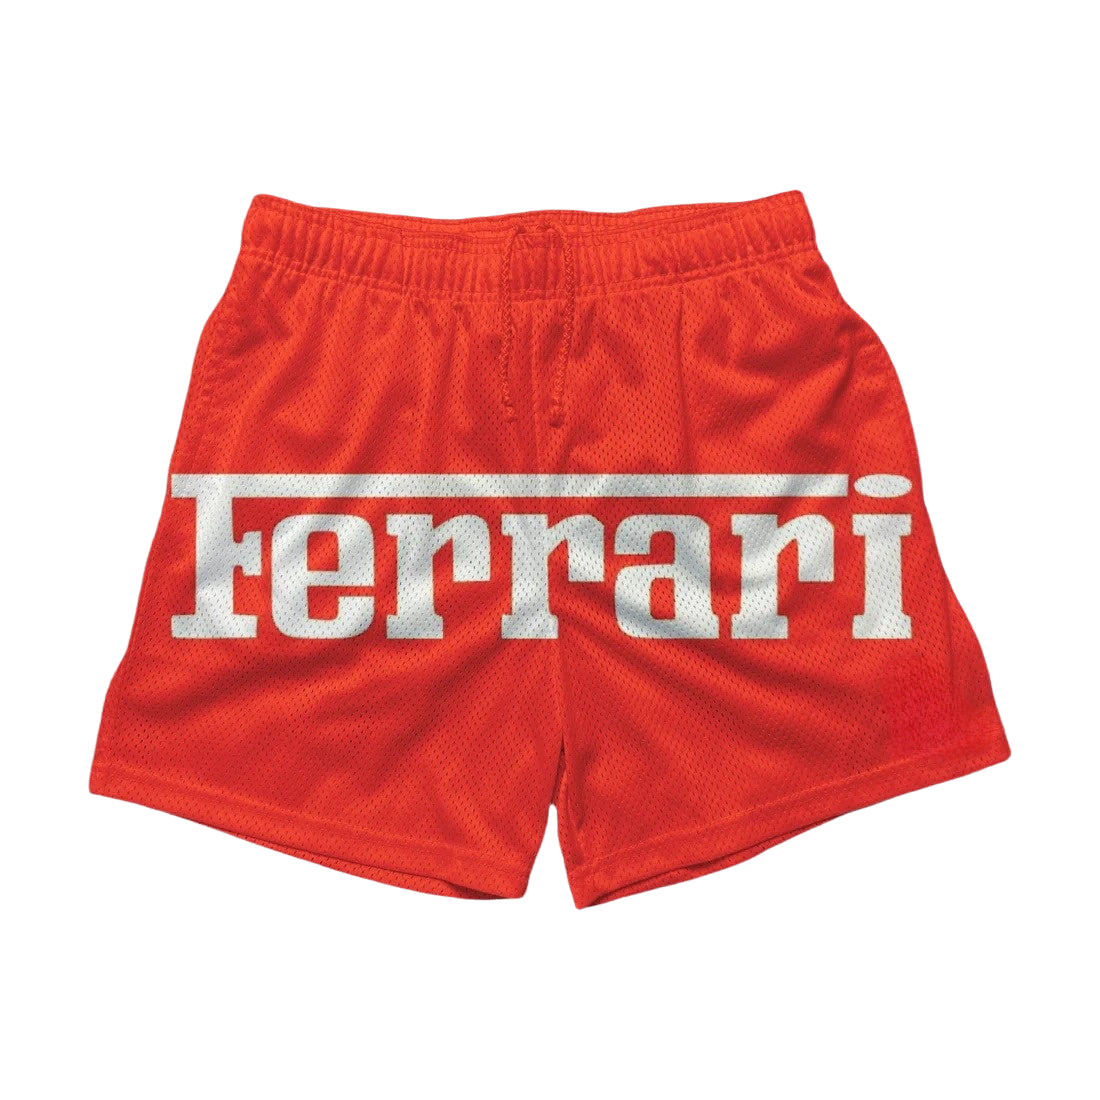 a red shorts with the word ferrari printed on it